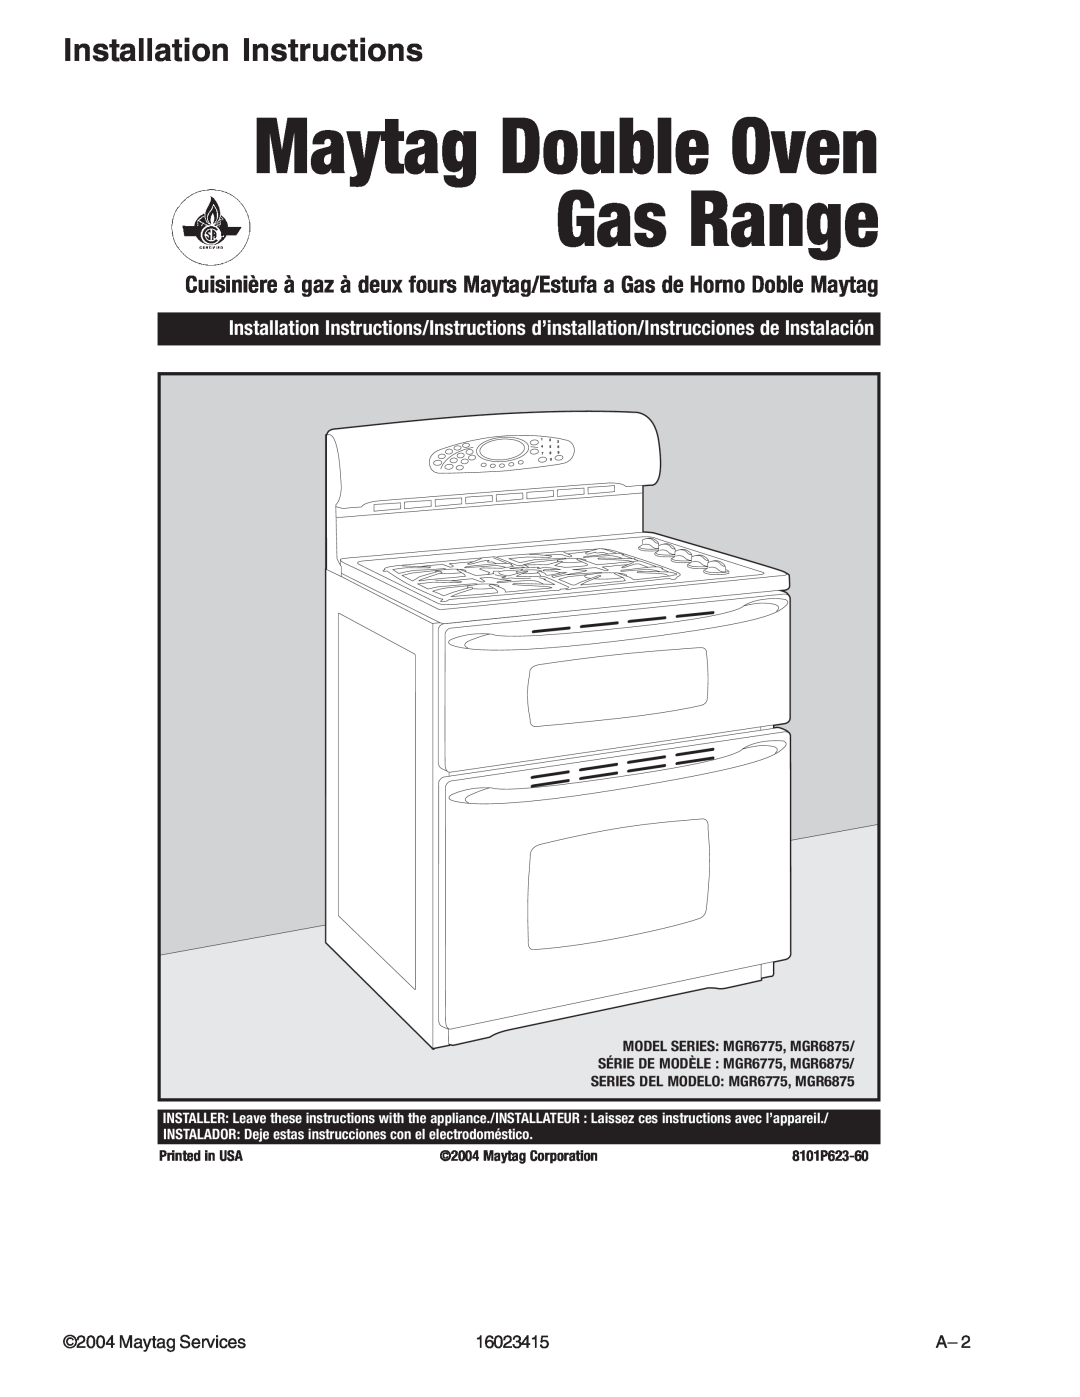 Maytag MGR6775ADB/Q/S/W manual Installation Instructions, Maytag Double Oven Gas Range, MODEL SERIES: MGR6775, MGR6875 